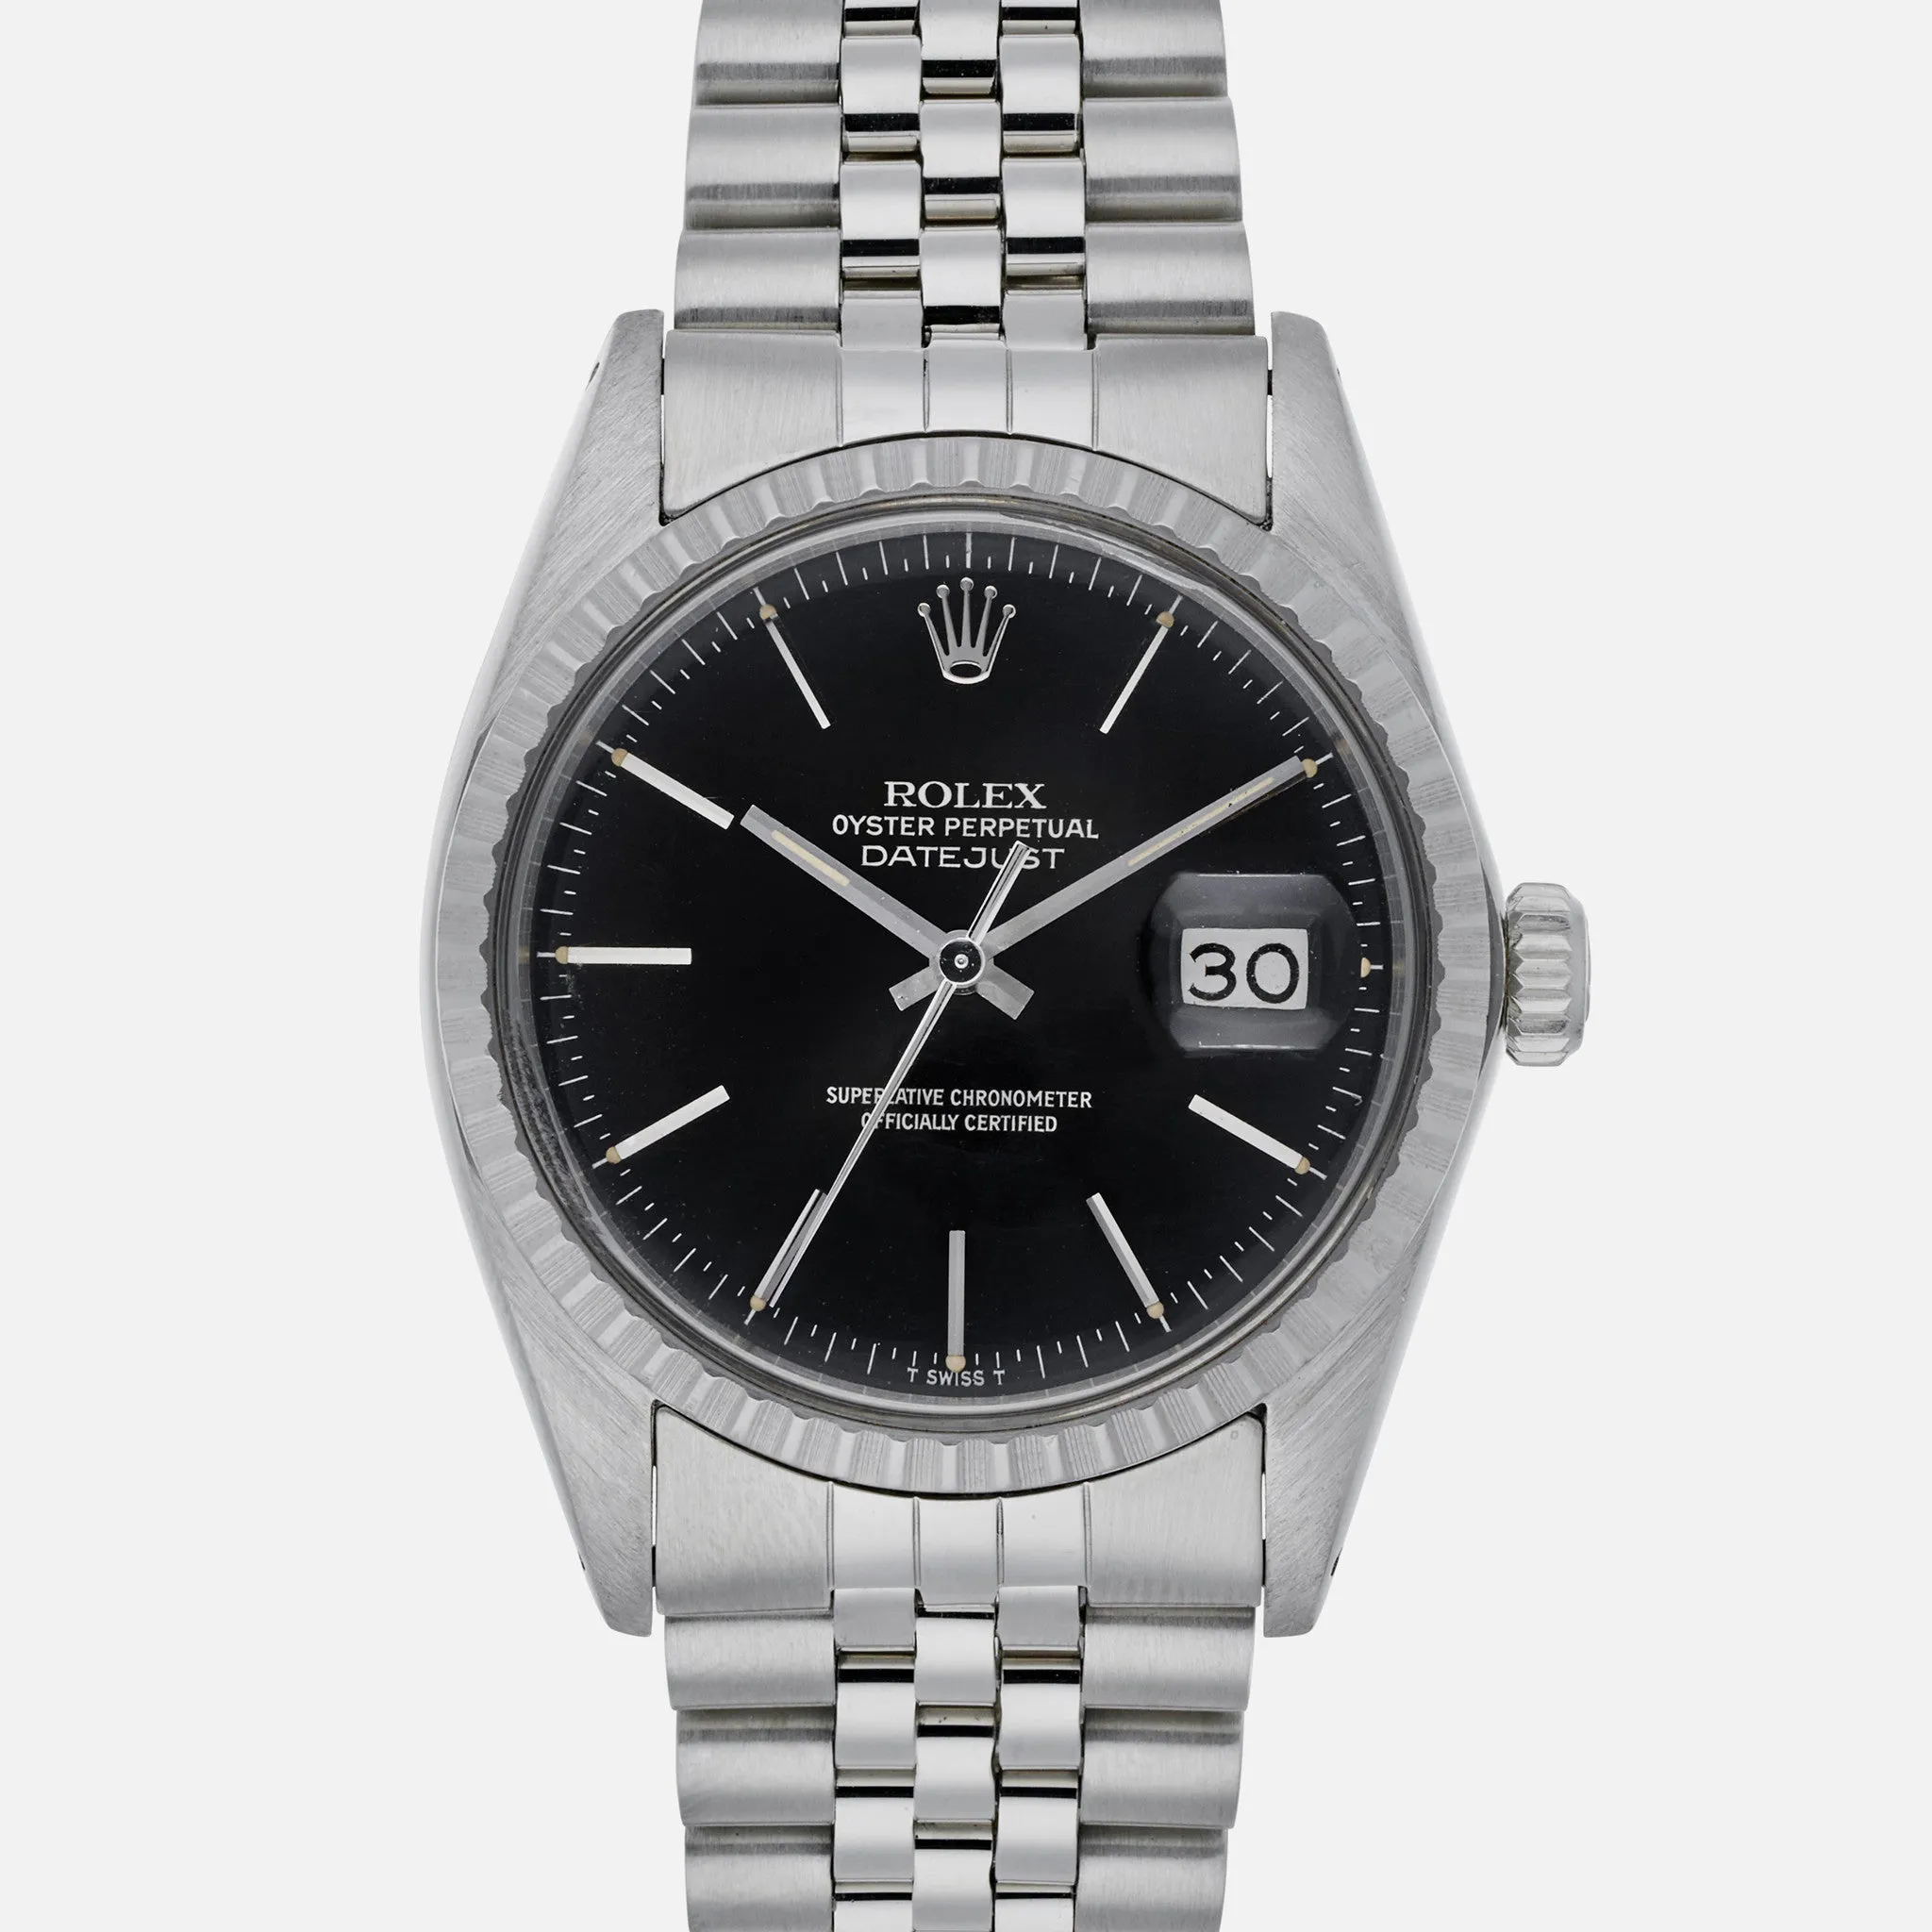 Rolex Datejust 1603 36mm Stainless steel Glossy black